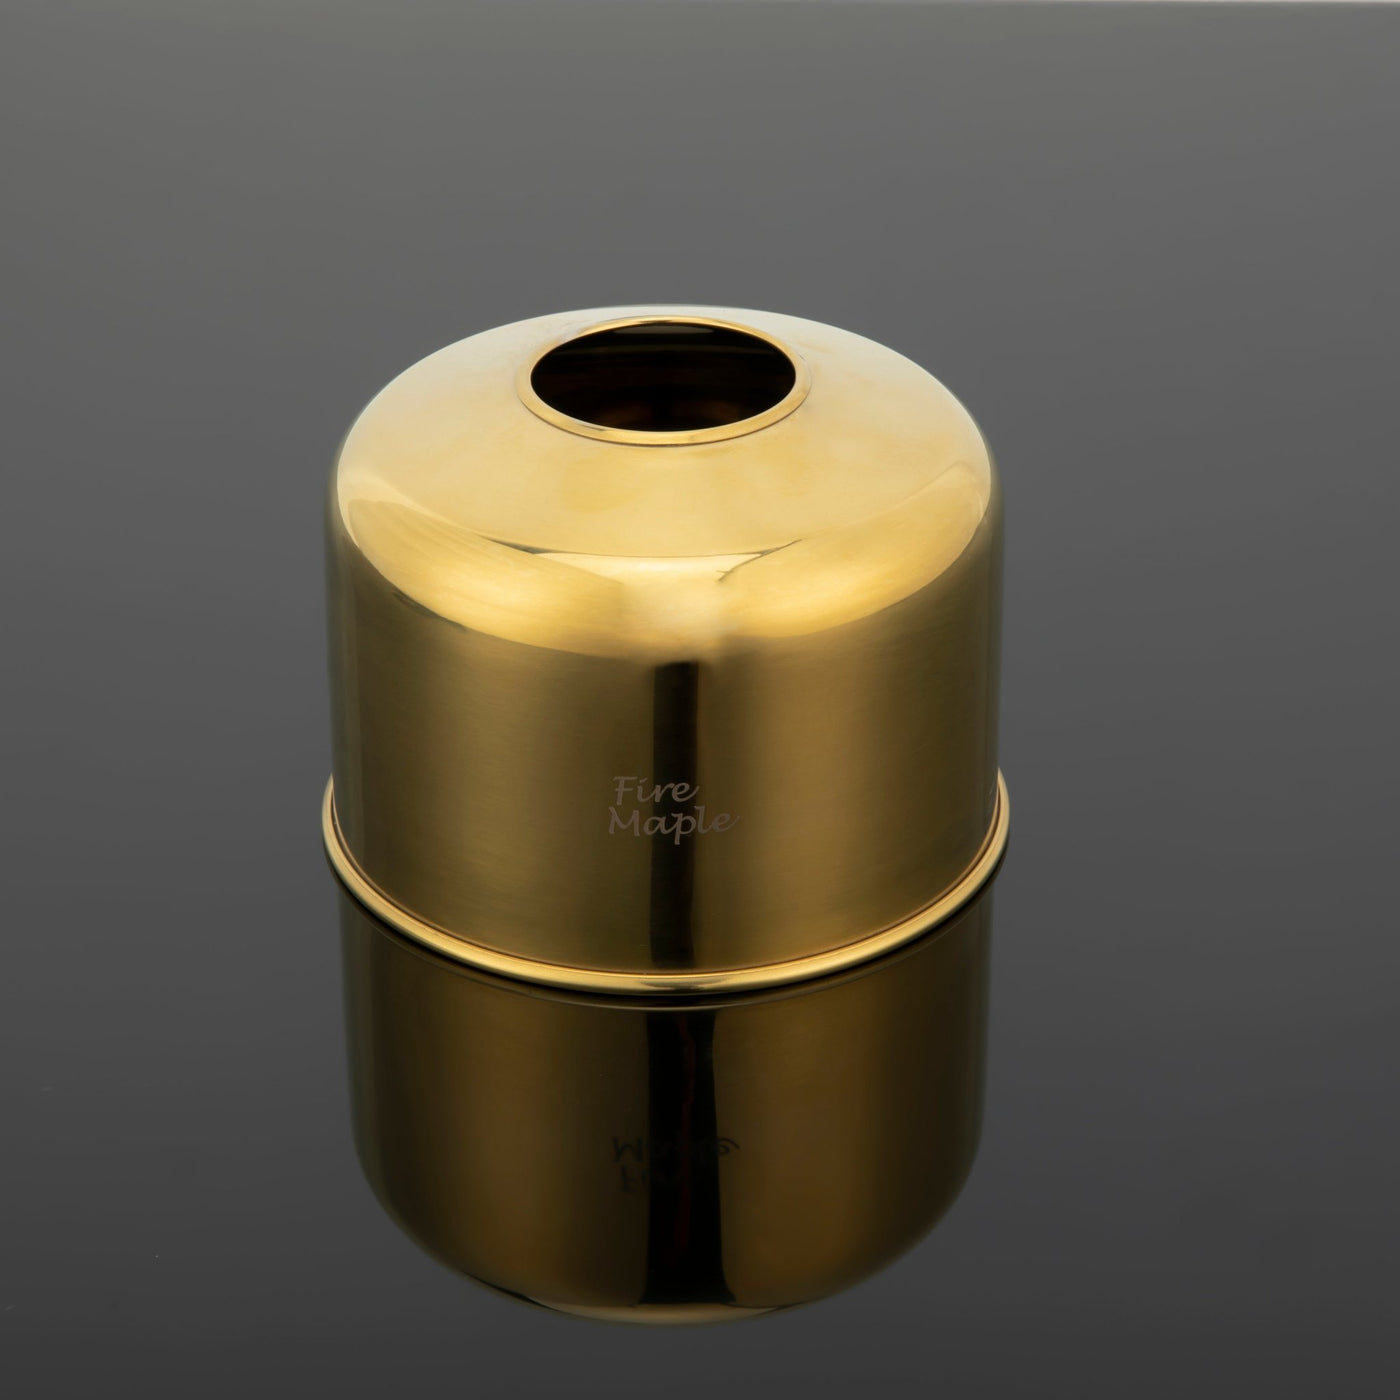 Dome Gas Cartridge Cover - Fire Maple